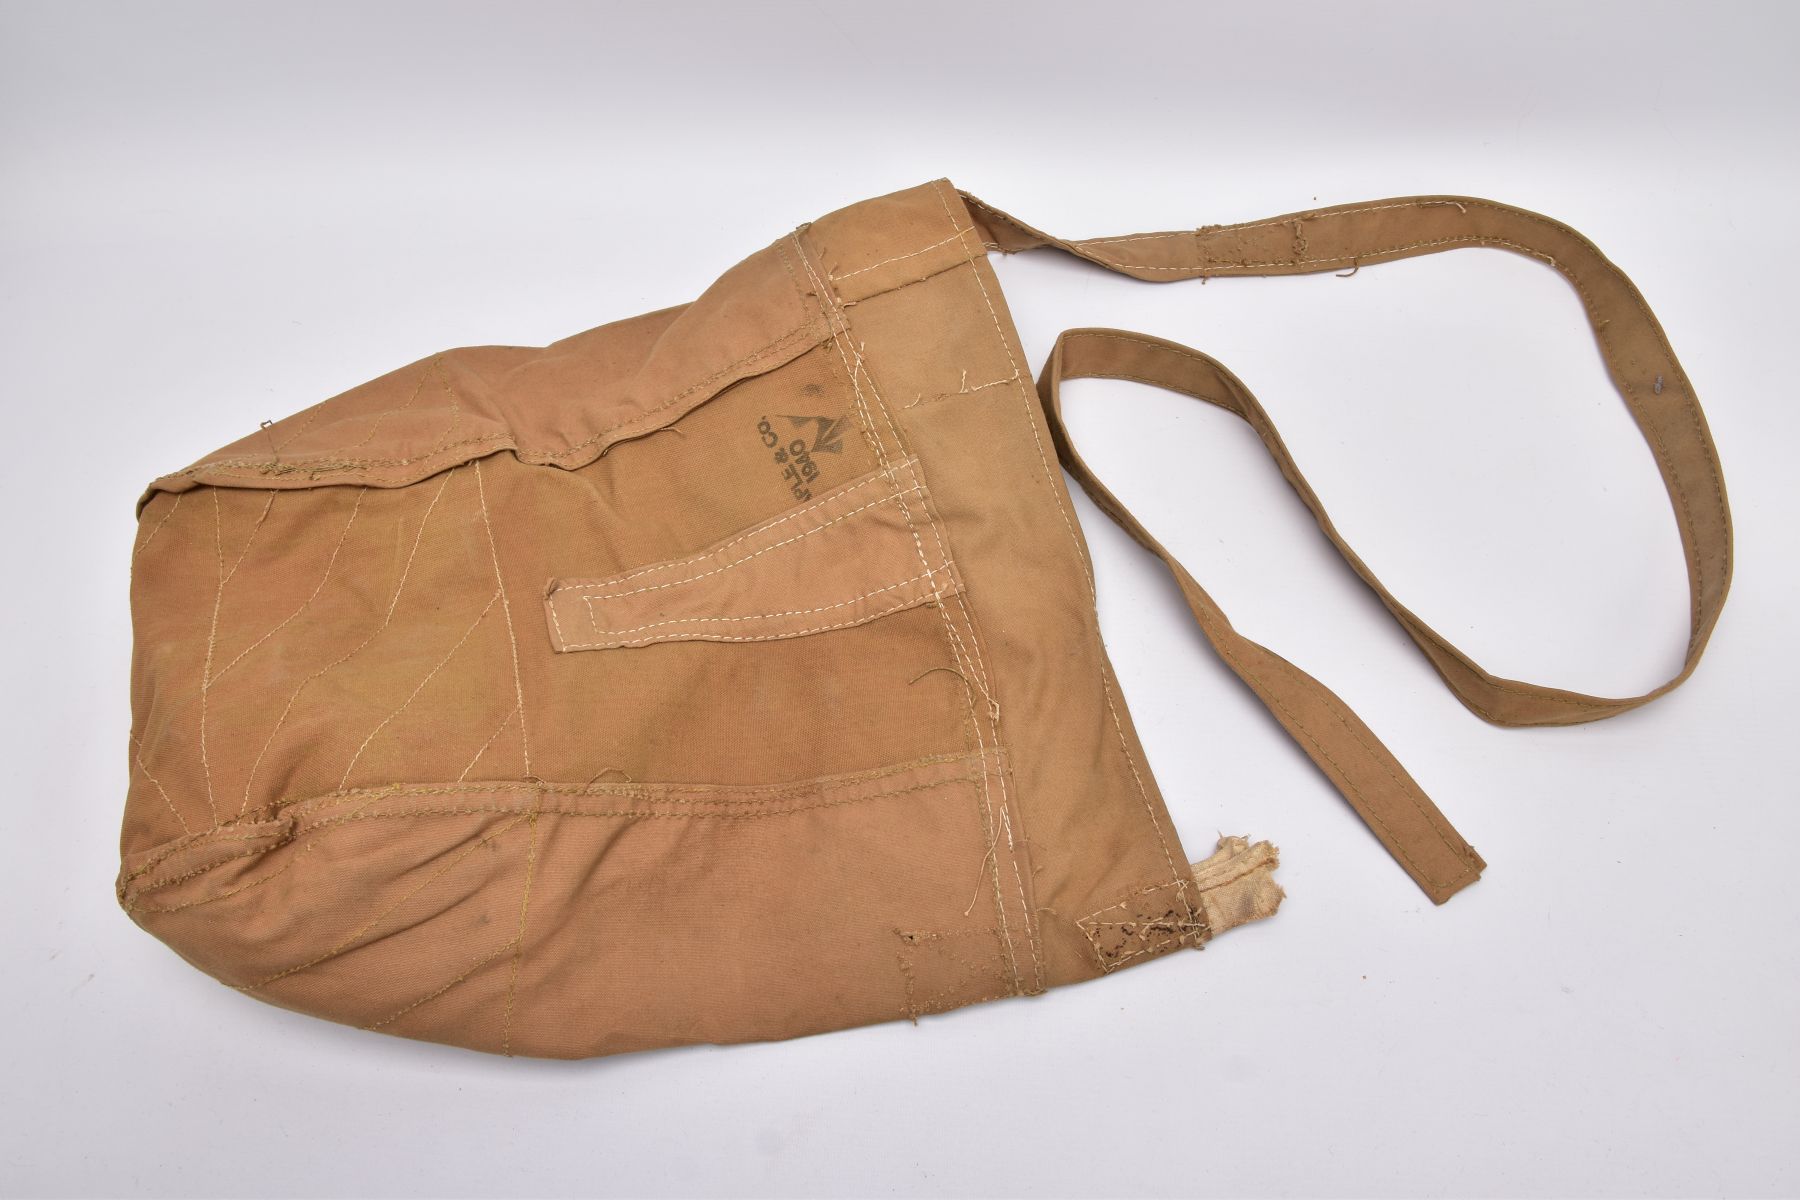 A WWII ERA SAND COLOURED MILITARY KIT/DUFFEL BAG, stamped to outside Aple & Co Ltd 1940 Crows - Image 4 of 5